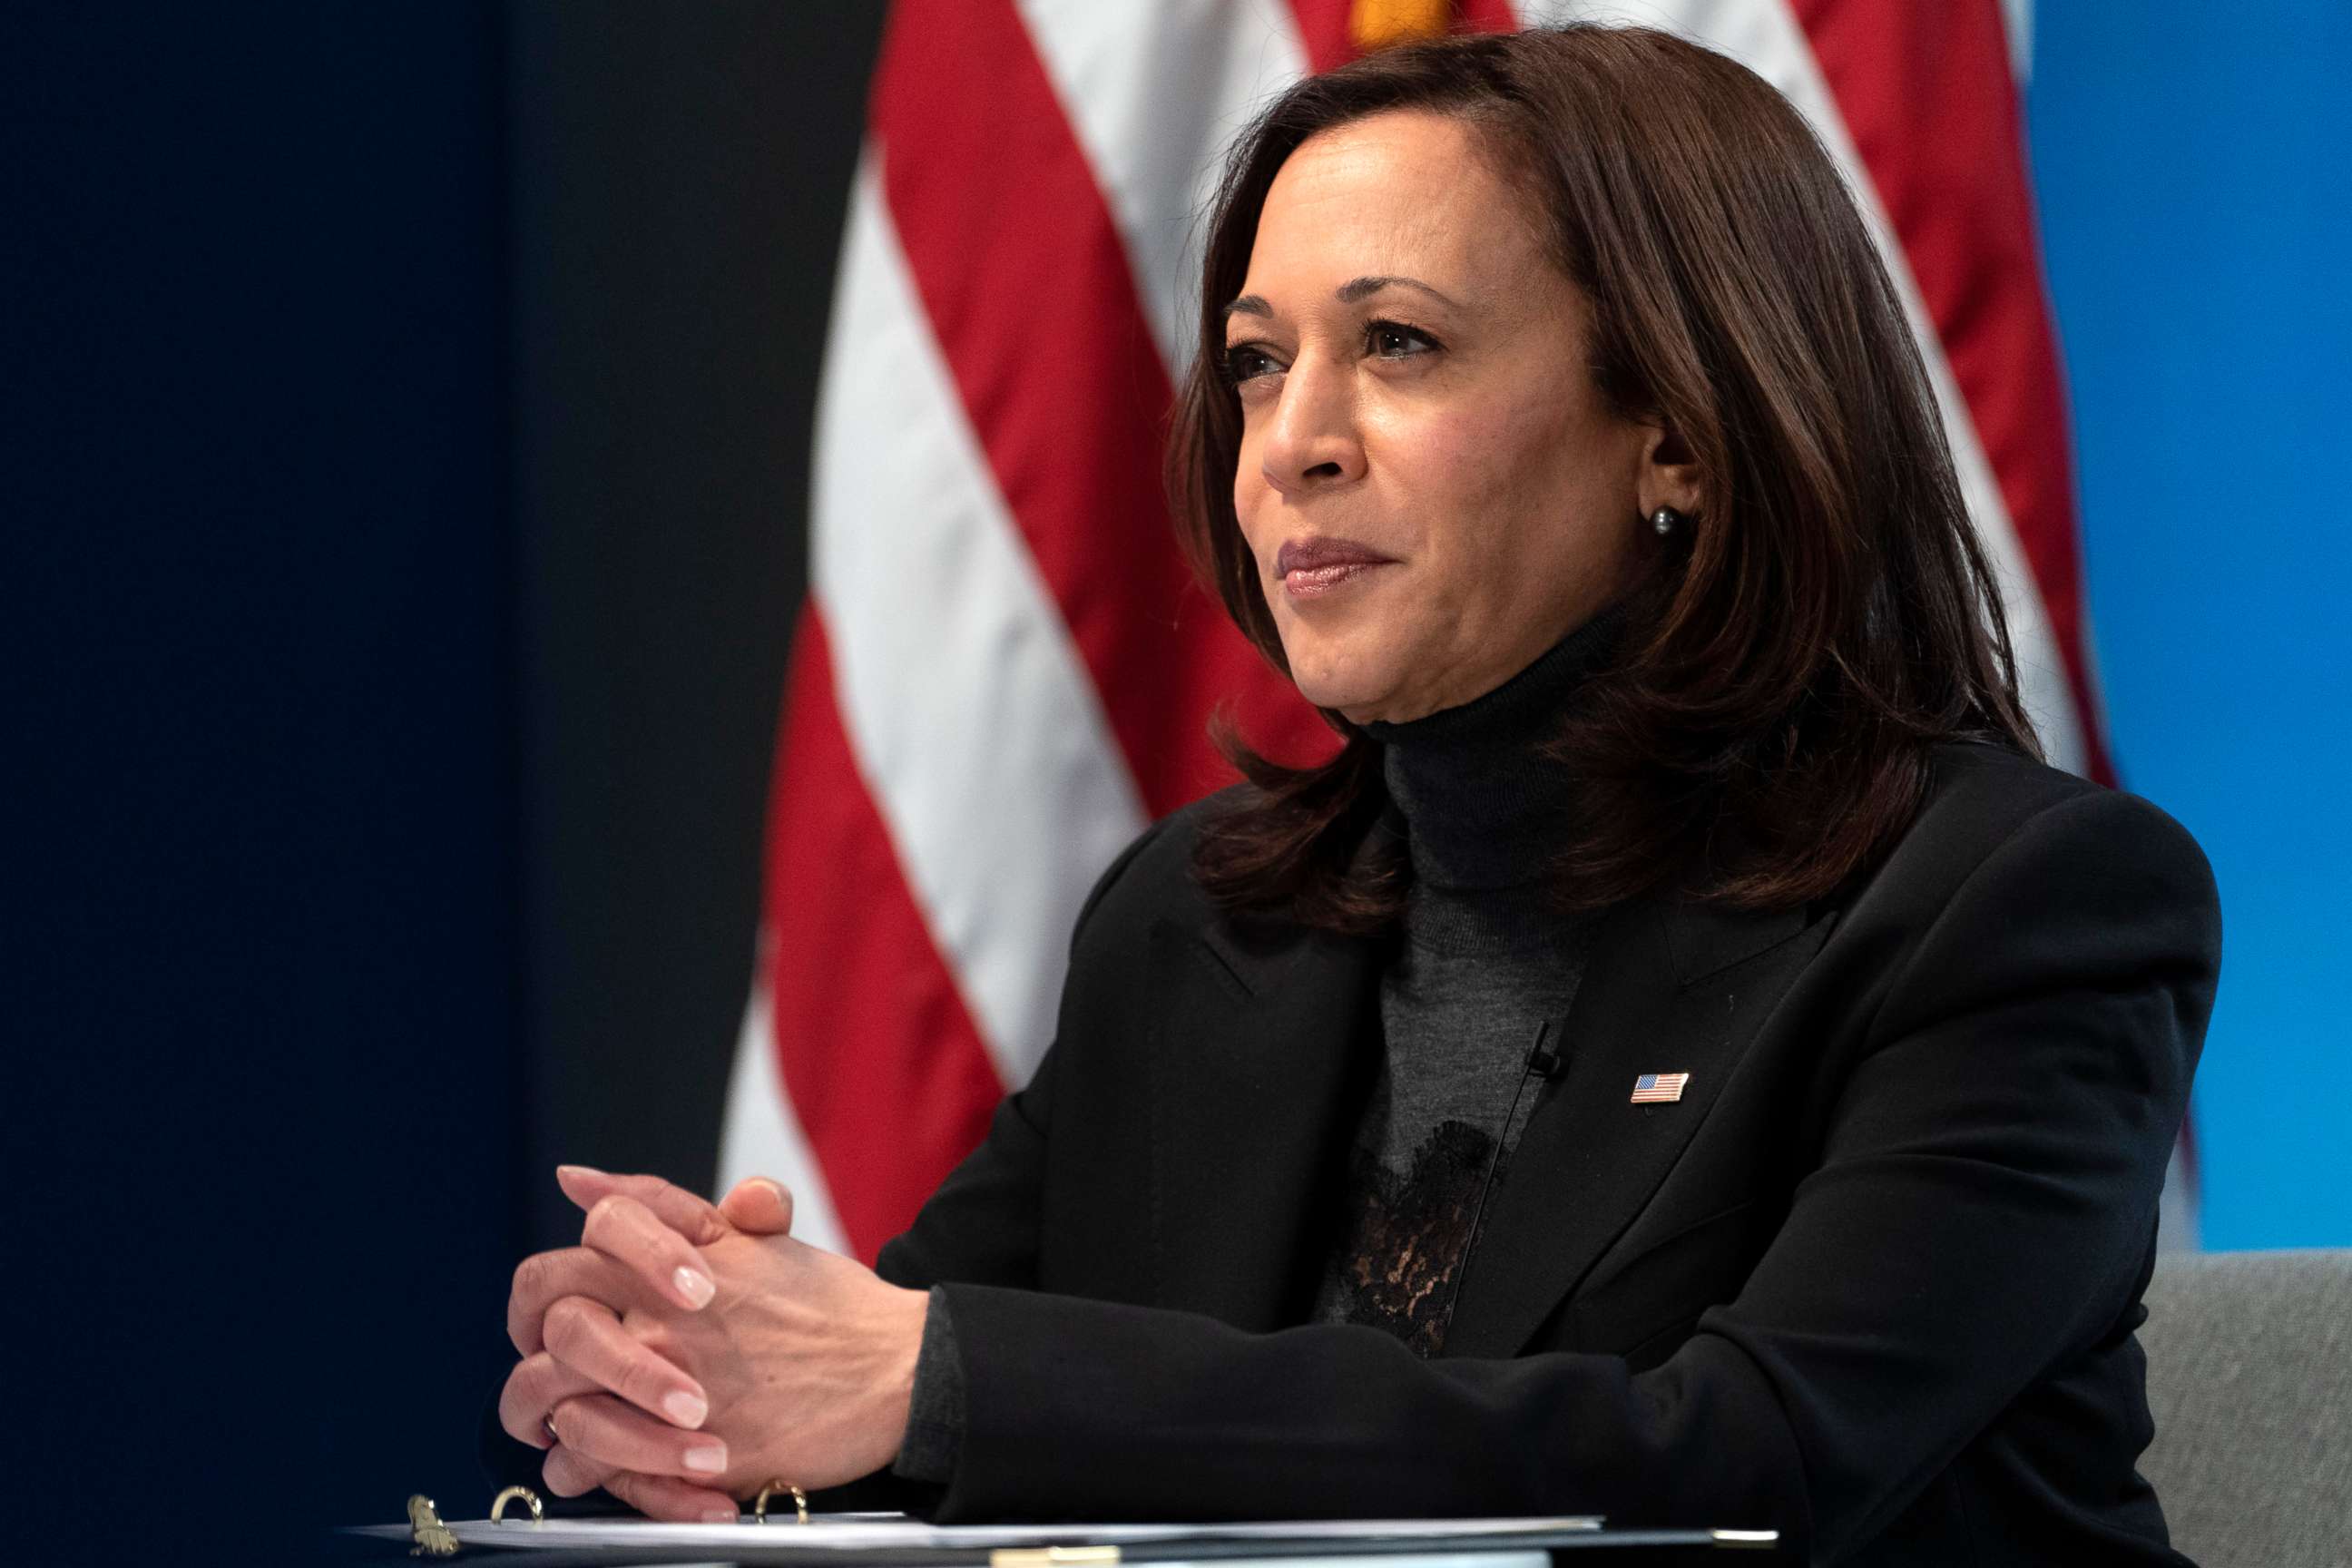 PHOTO: Vice President Kamala Harris meets with leaders of women's advocacy groups, Feb. 18, 2021, in Washington, D.C.